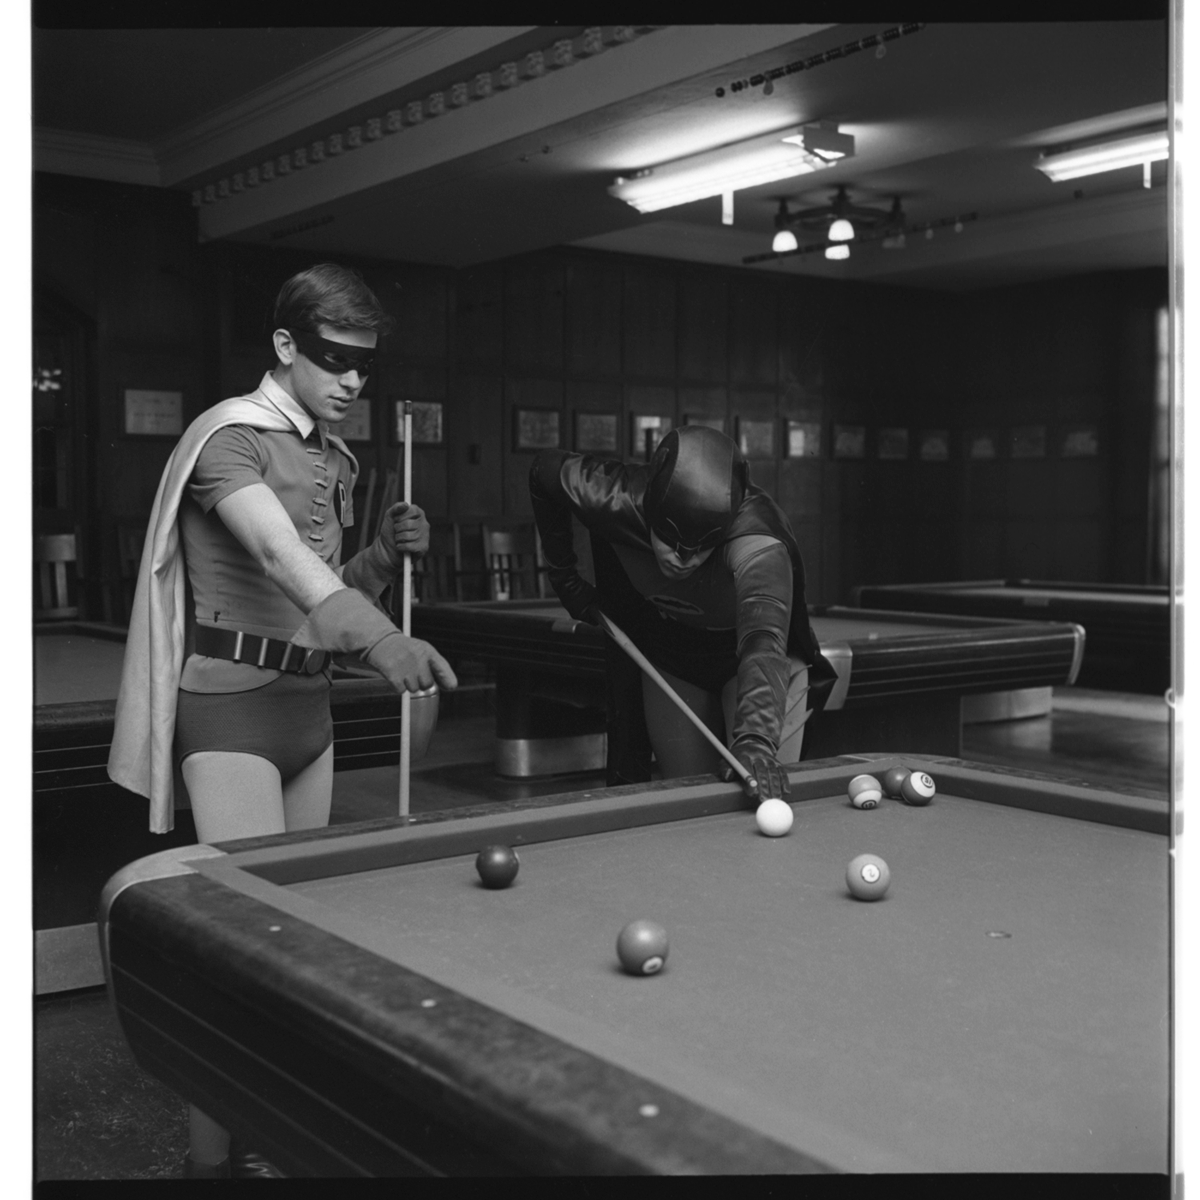 Students dressed as Batman and Robin playing pool at the Michigan Union 

(1966).